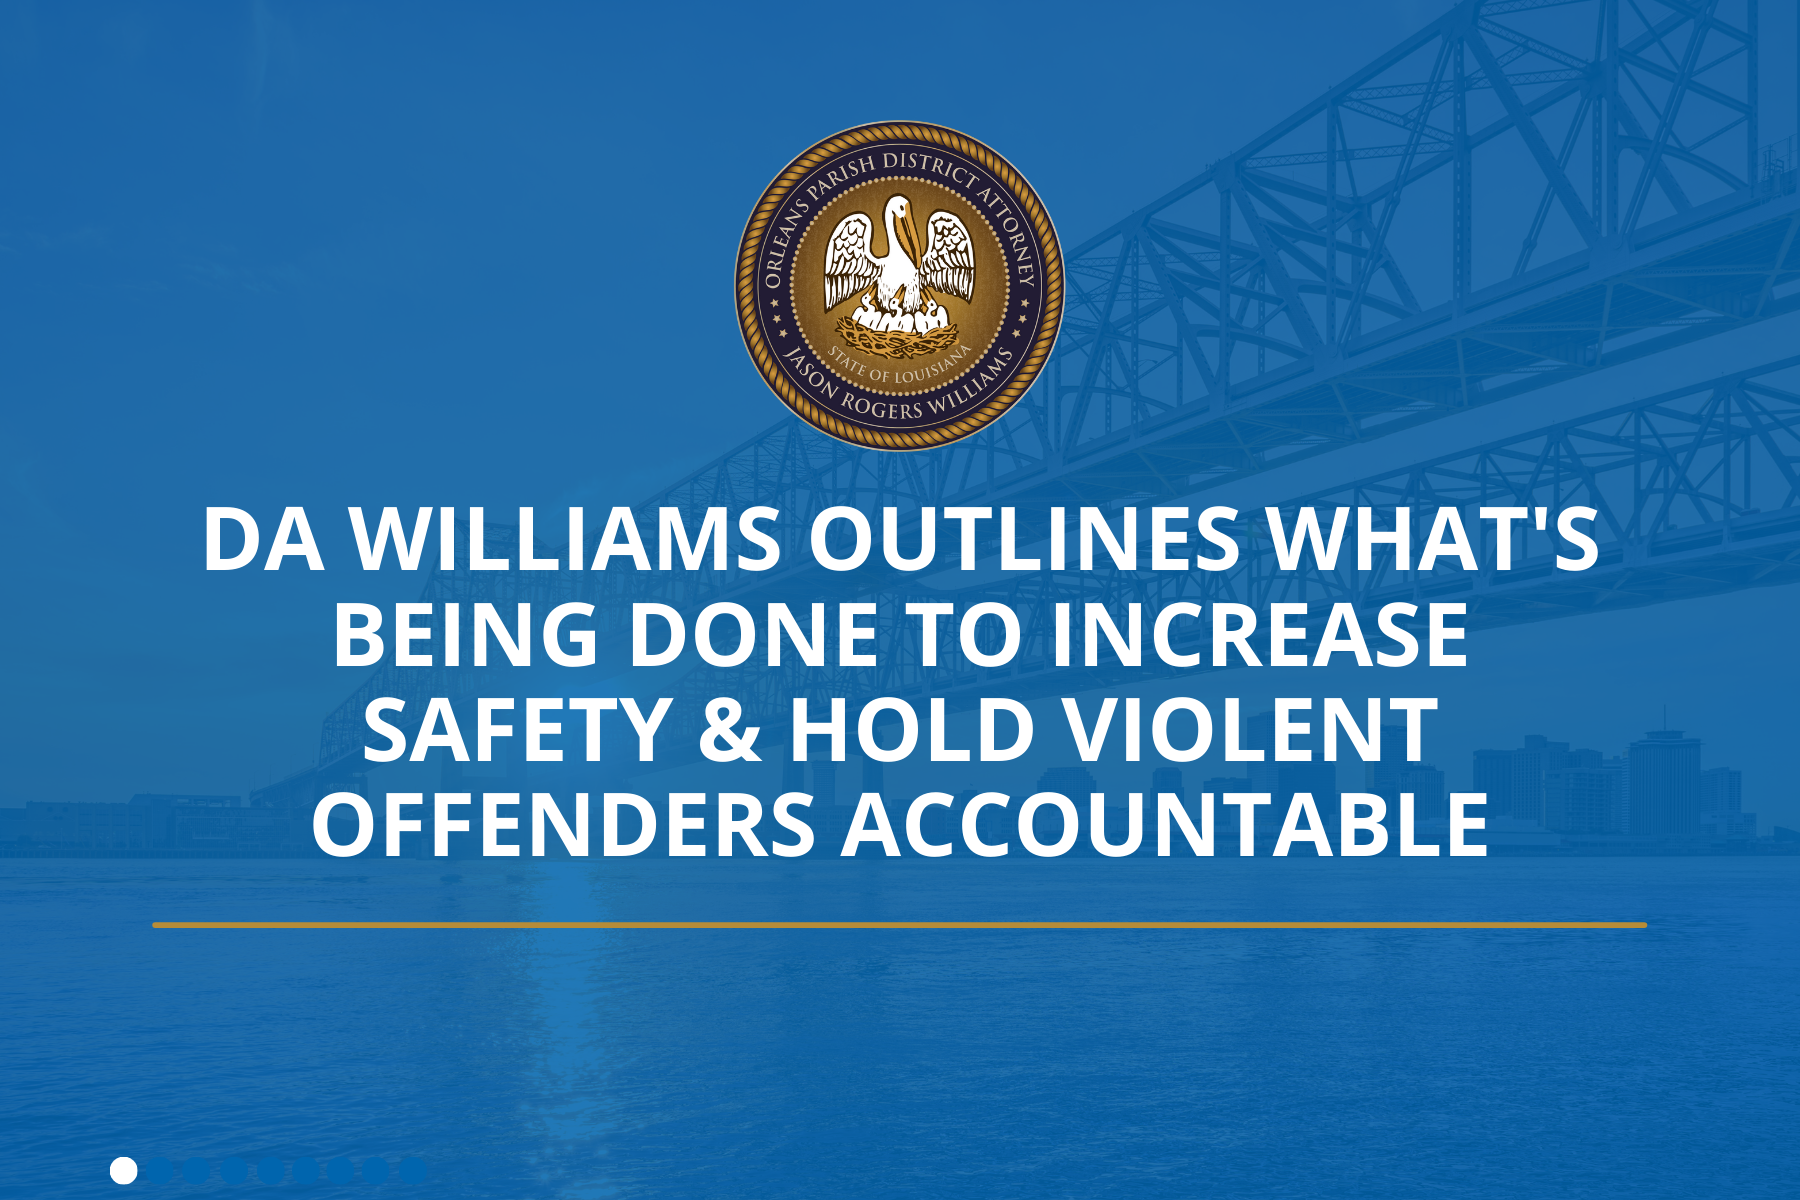 DA Williams Discusses Latest Policies To Increase Safety In Neighborhoods, Hold Violent Offenders Accountable